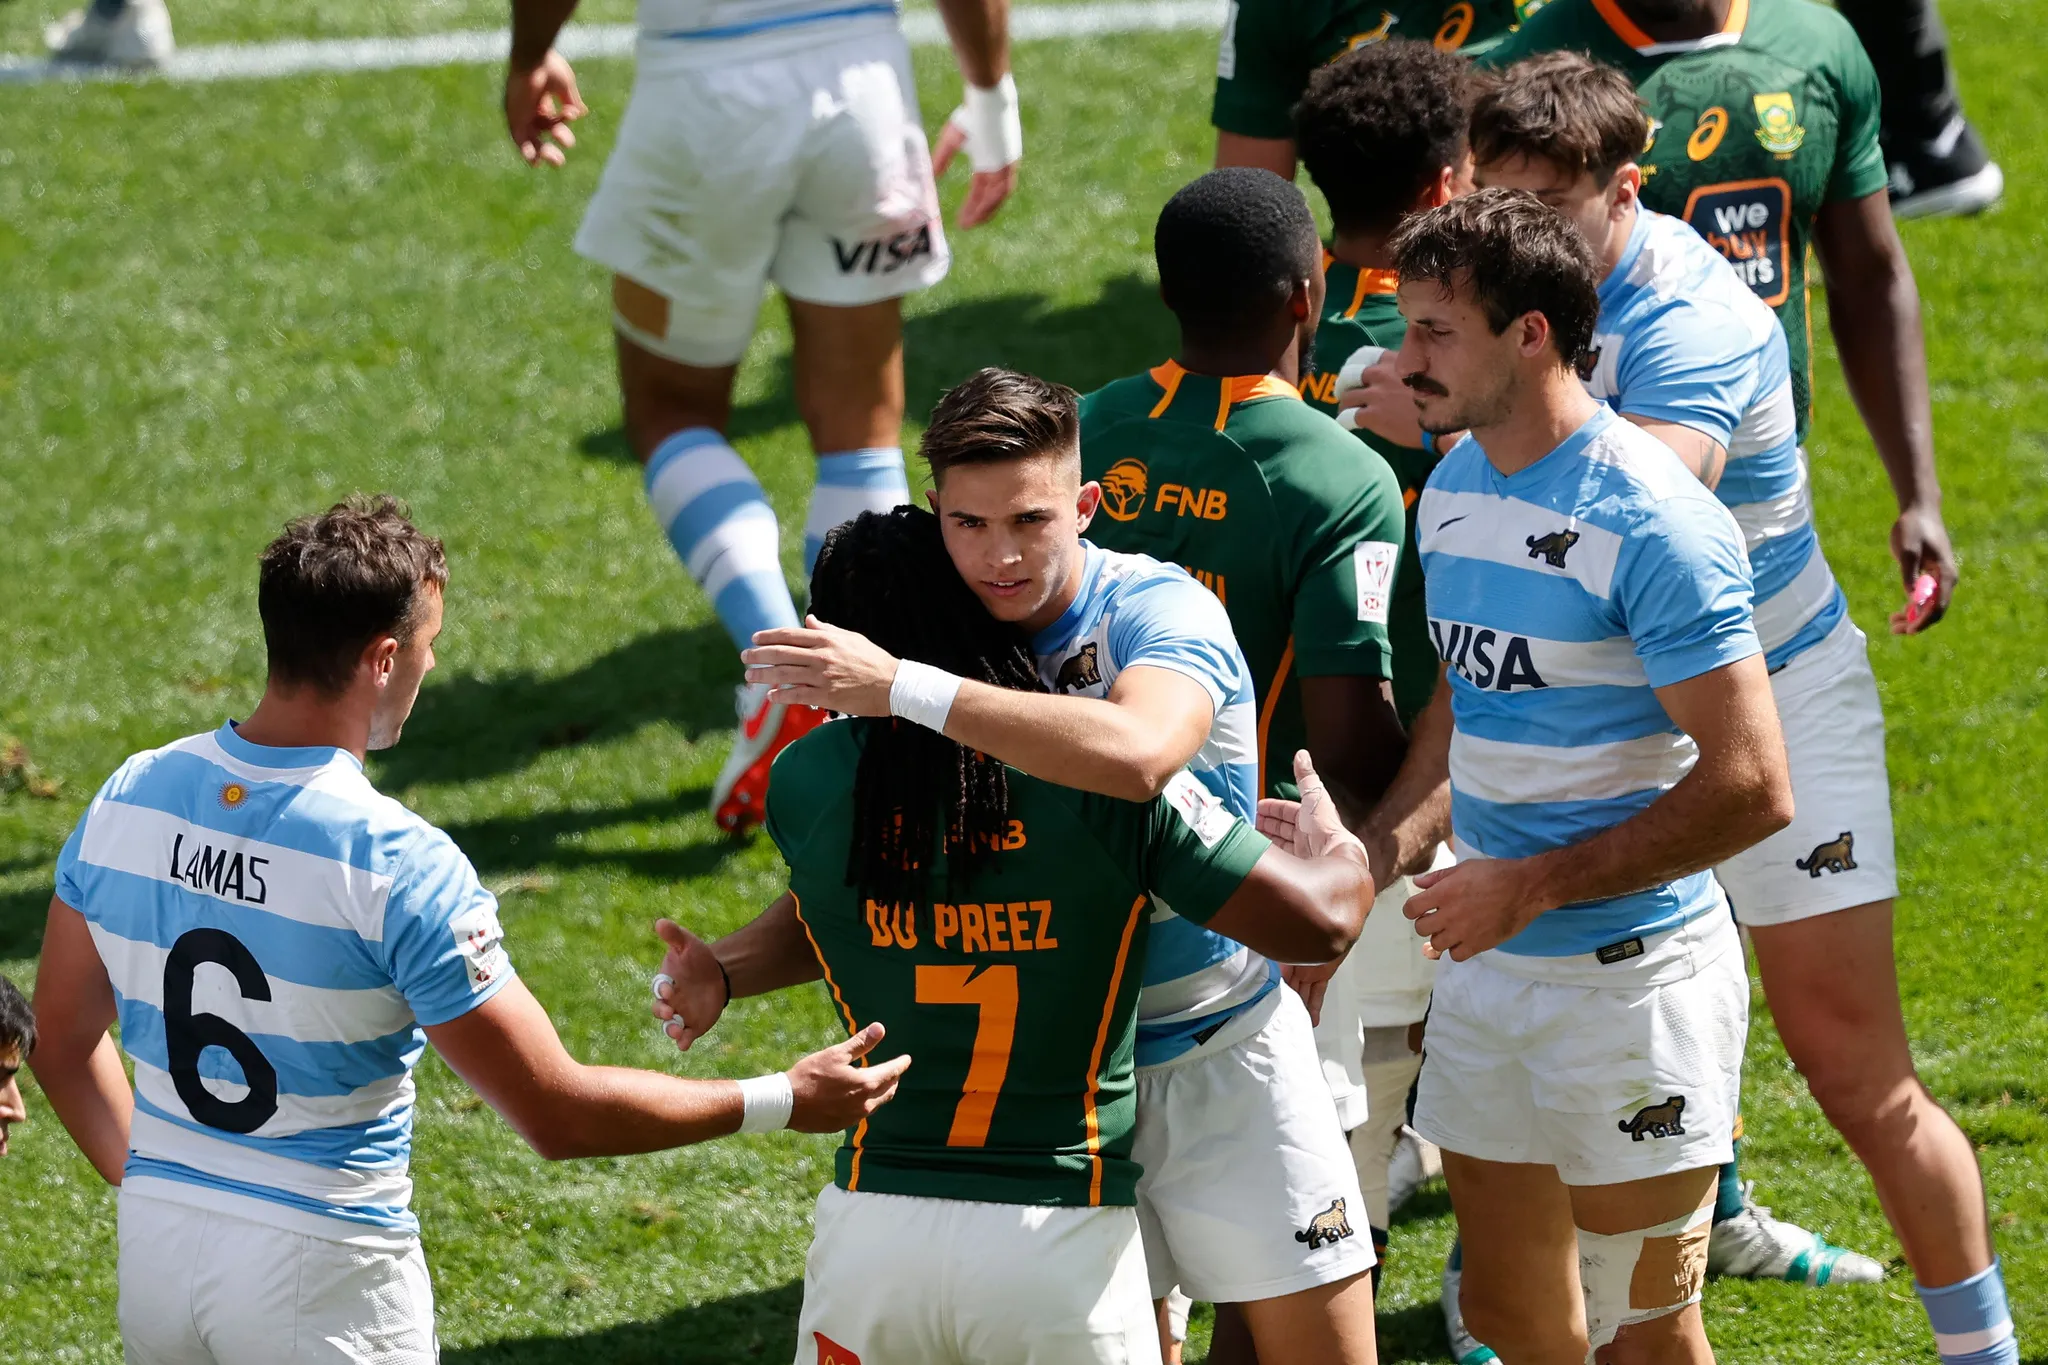 South Africa aim to clinch Series title following dramatic day at HSBC London Sevens